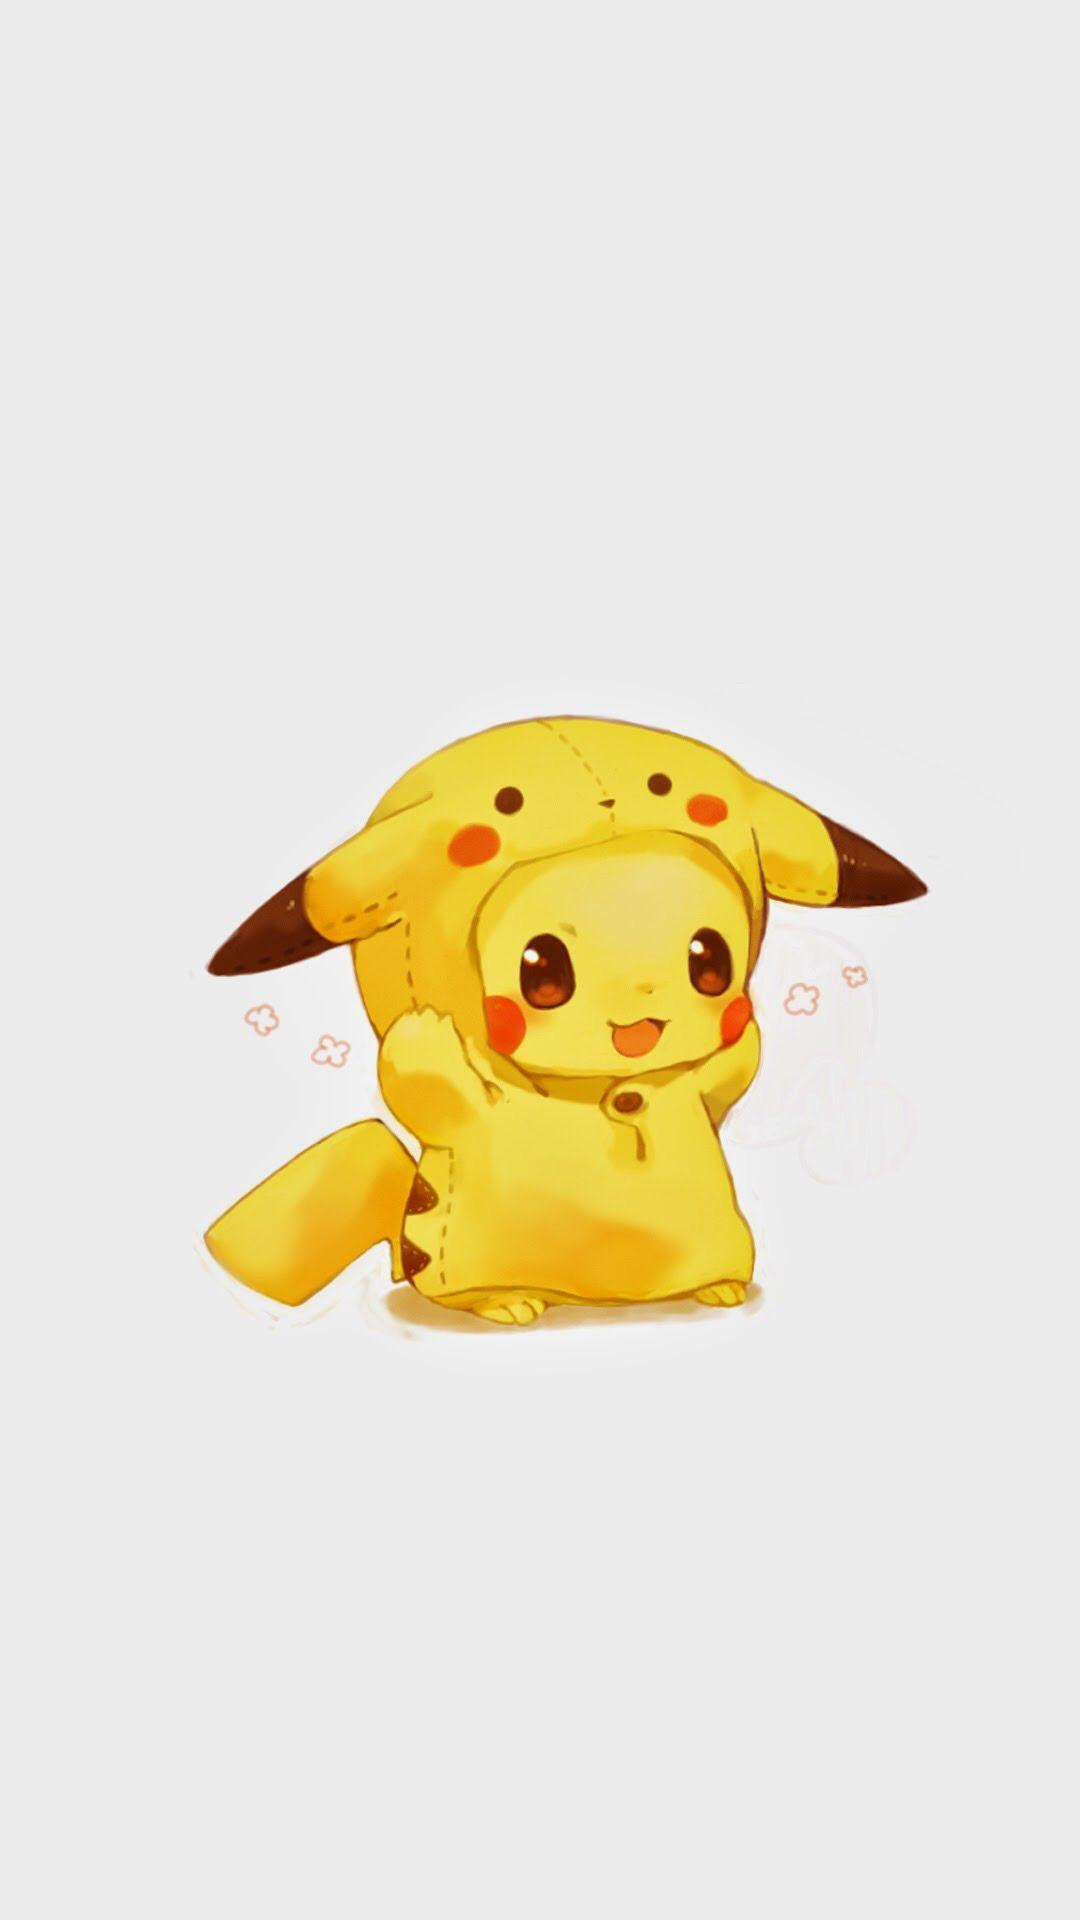 Free download Tap image for more funny cute Pikachu wallpaper